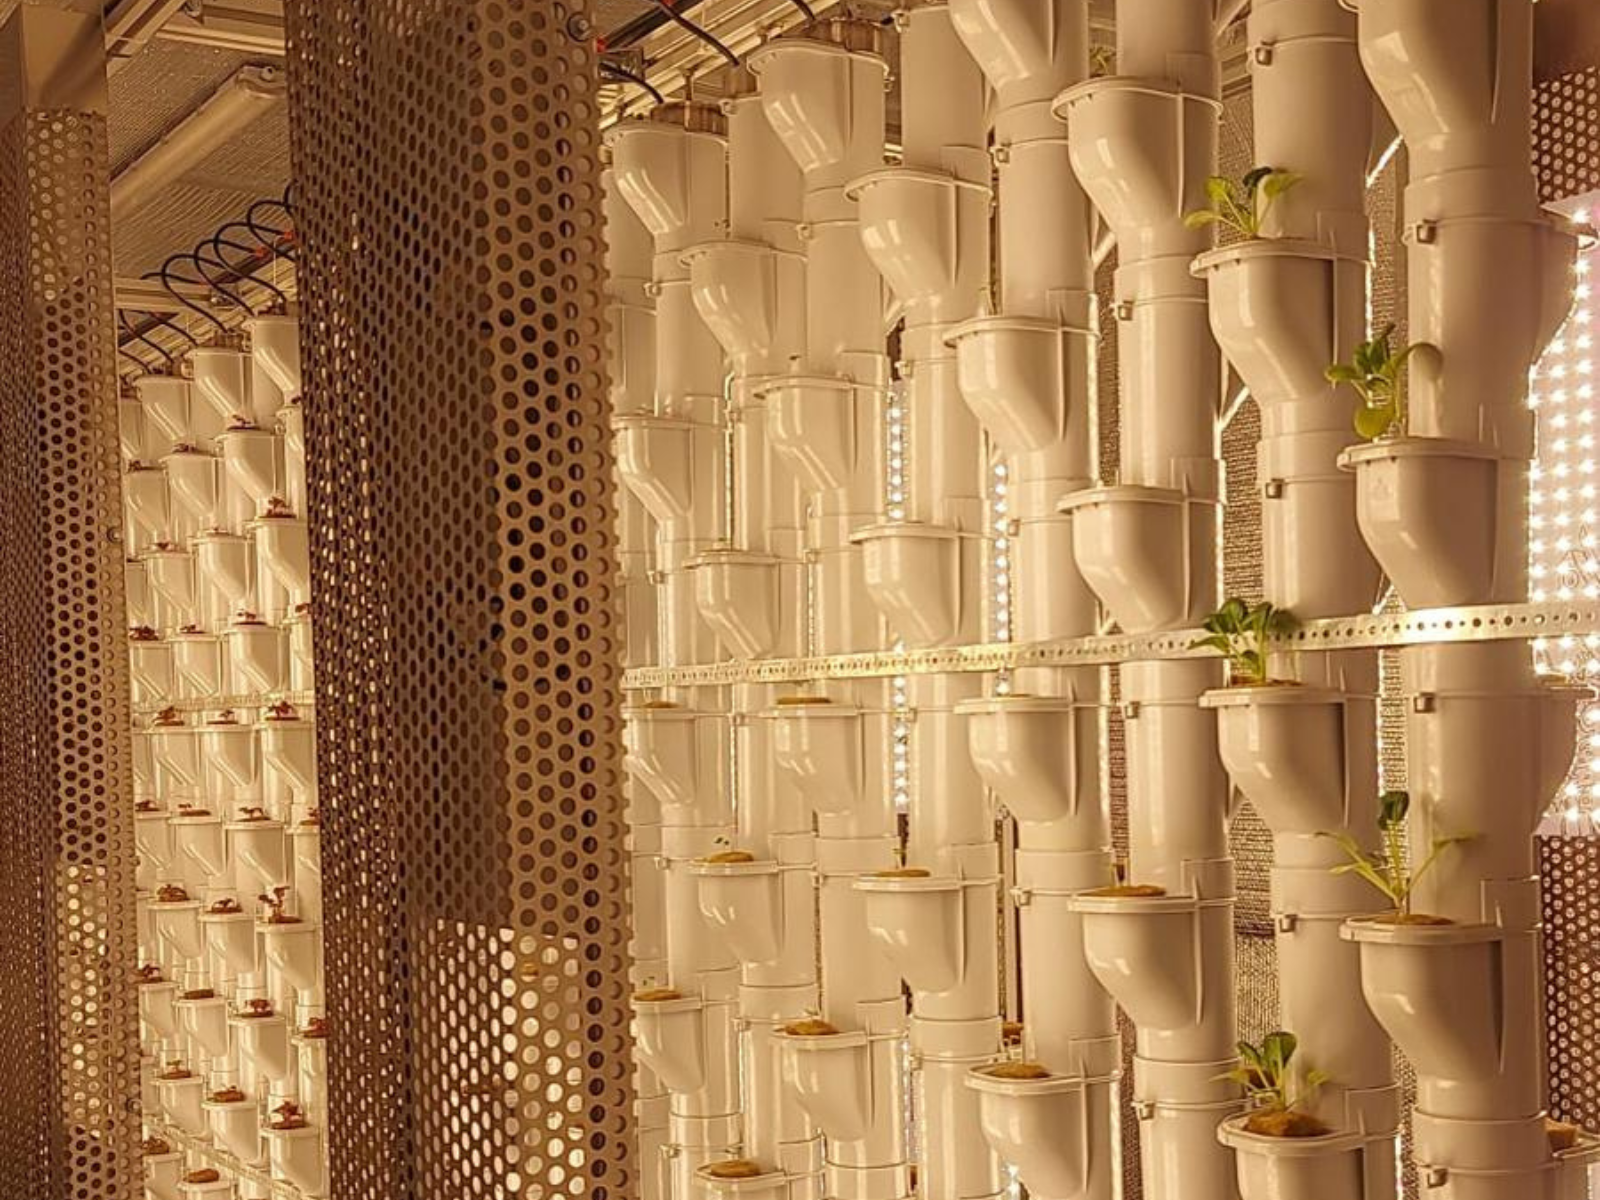 Vertical Farming System Growpipes